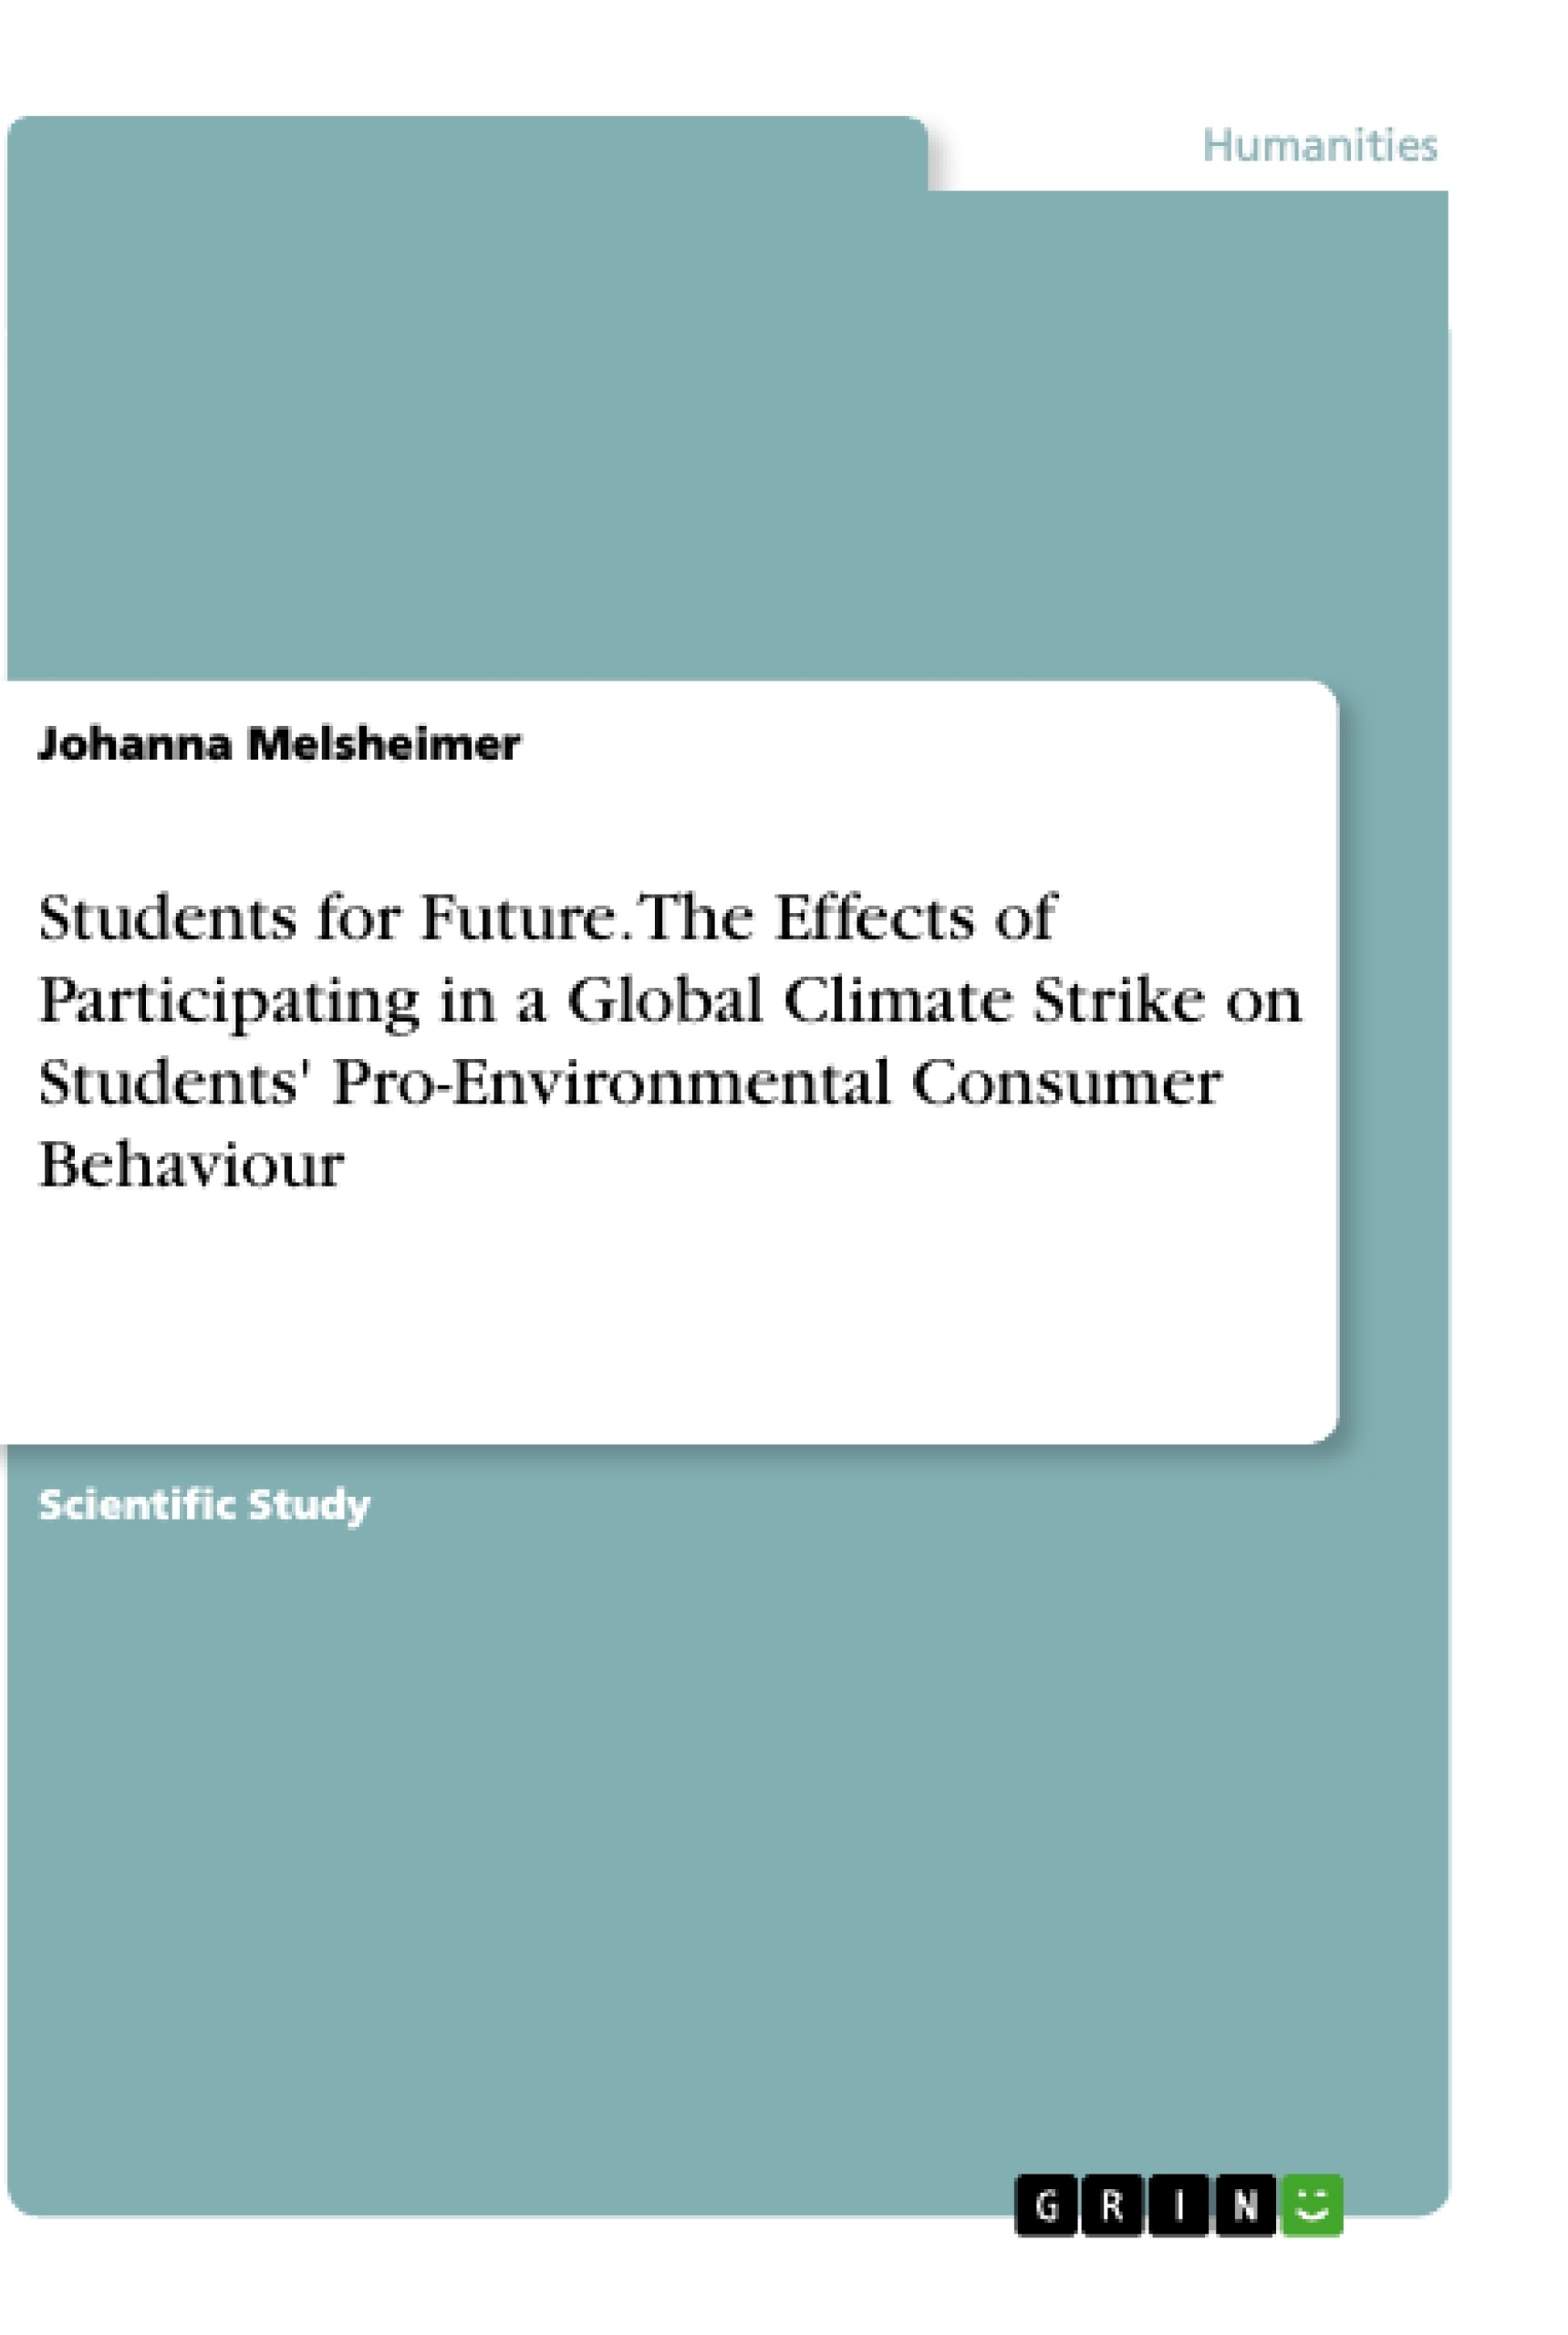 Titre: Students for Future. The Effects of Participating in a Global Climate Strike on Students' Pro-Environmental Consumer Behaviour